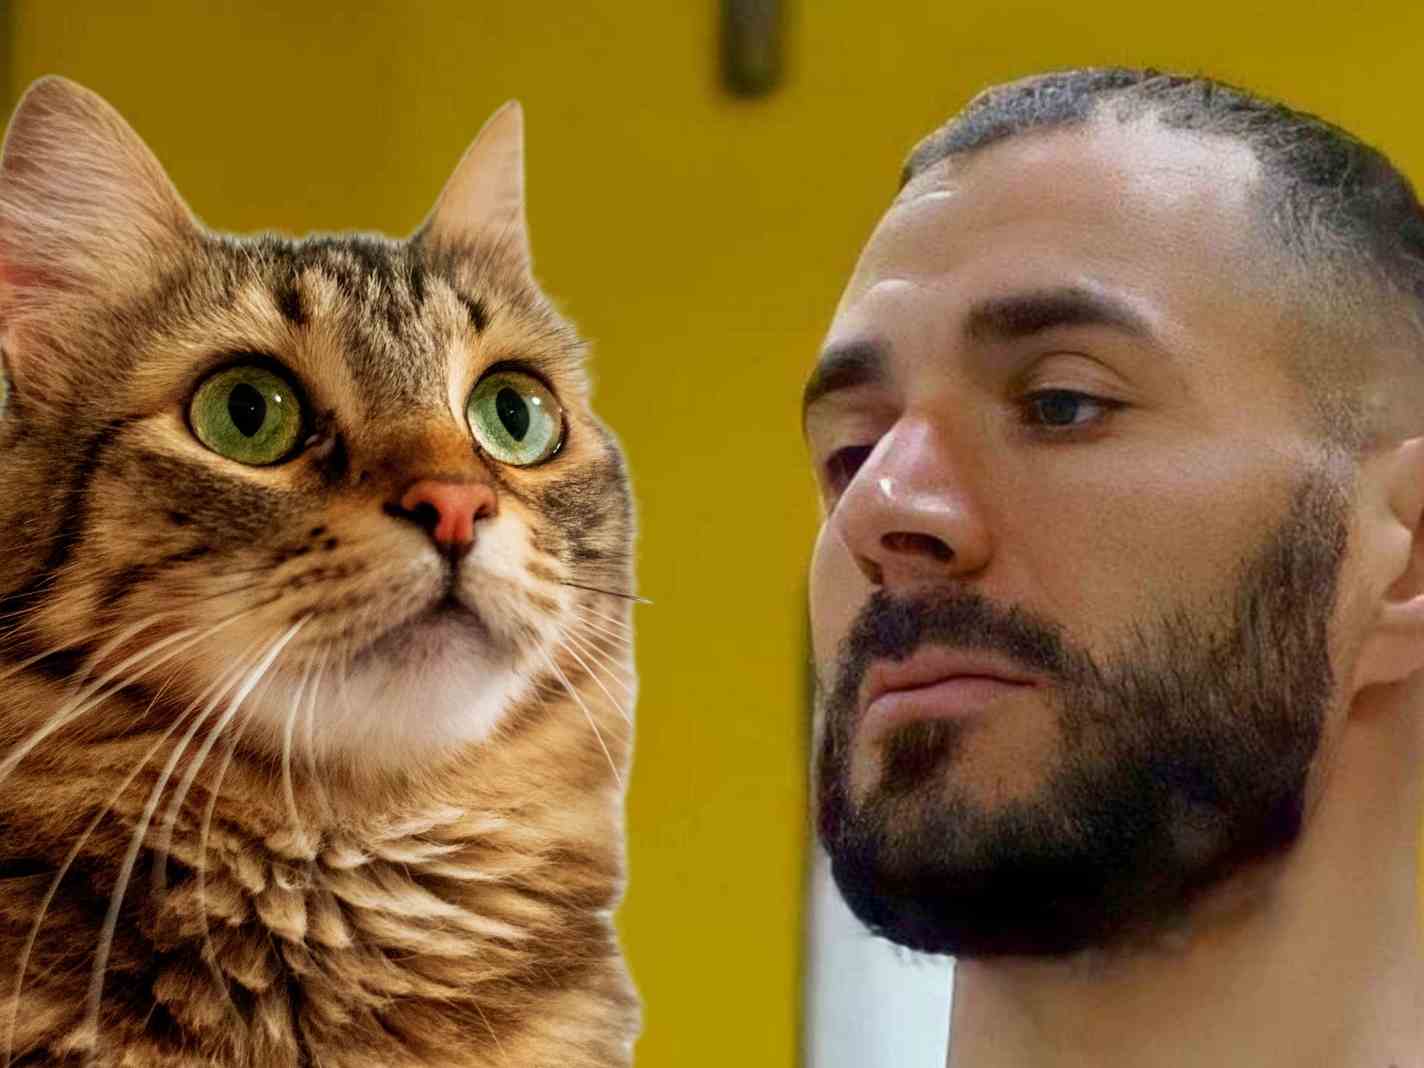 Fans spot Karim Benzema on cat and that’s enough internet for today